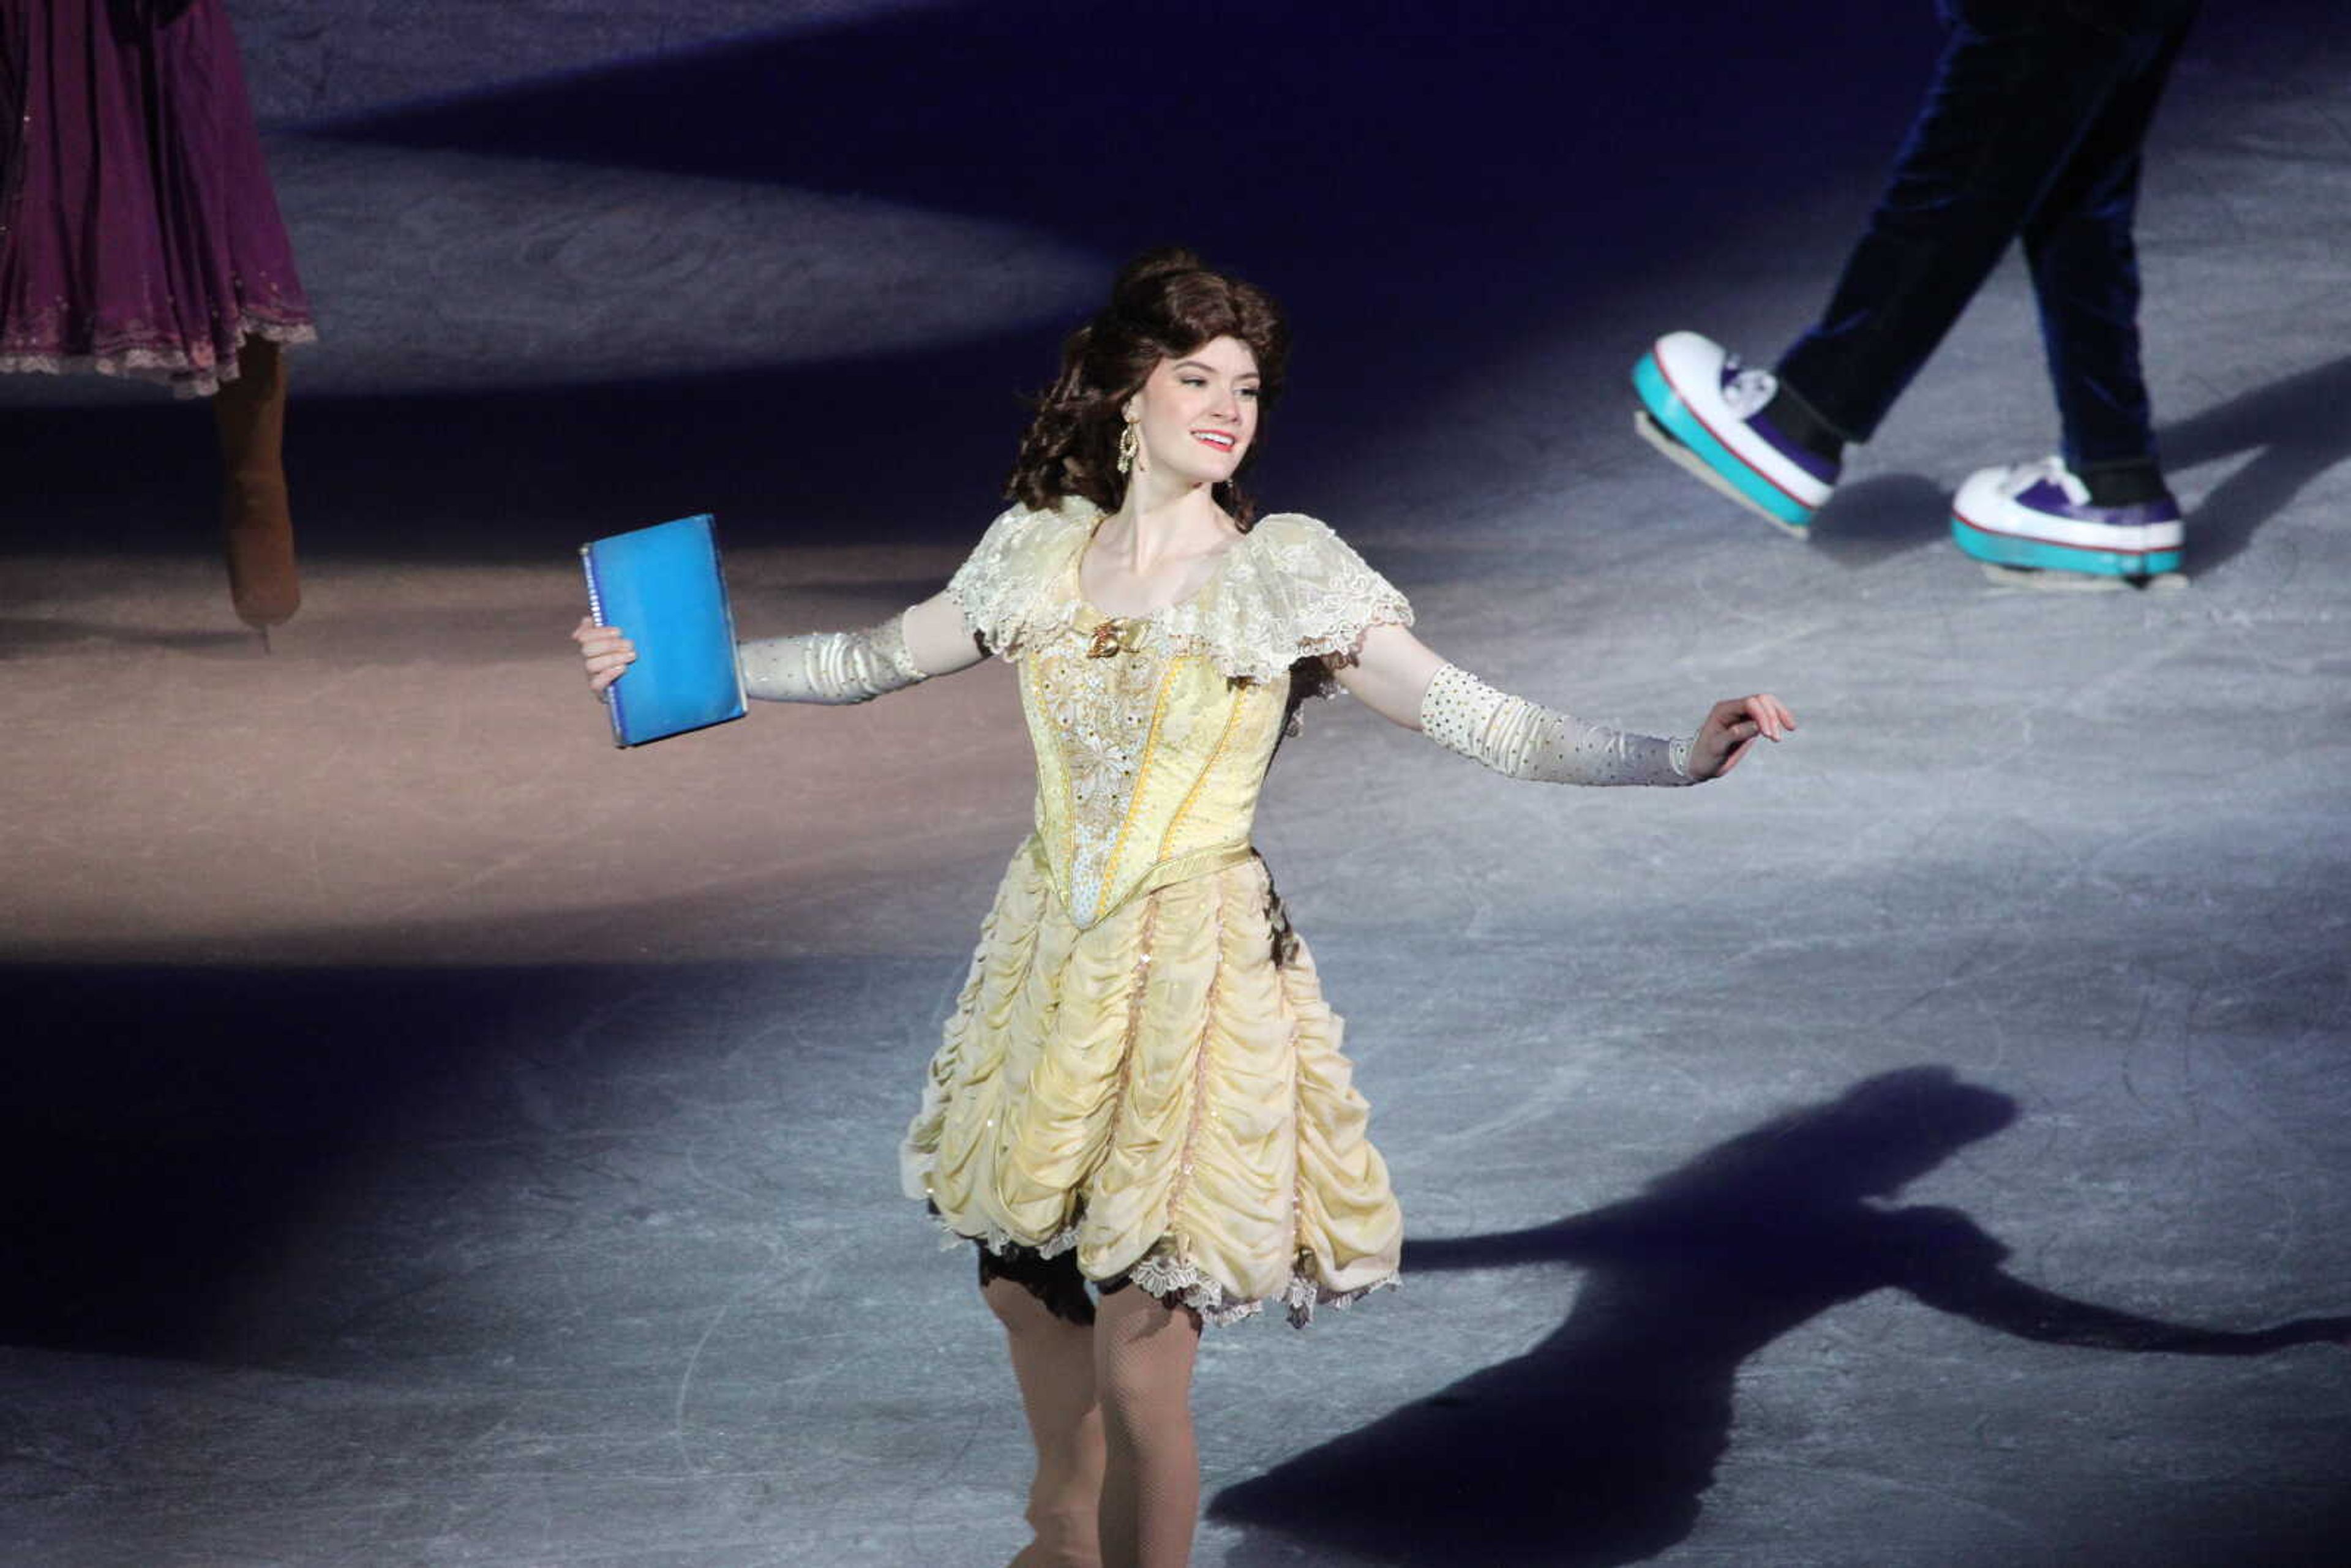 Princess Belle from Disney's "Beauty and the Beast" appeared with other princesses during Disney on Ice at the Show Me Center. It took 36 hours for workers to turn the Show Me Center into an ice rink.